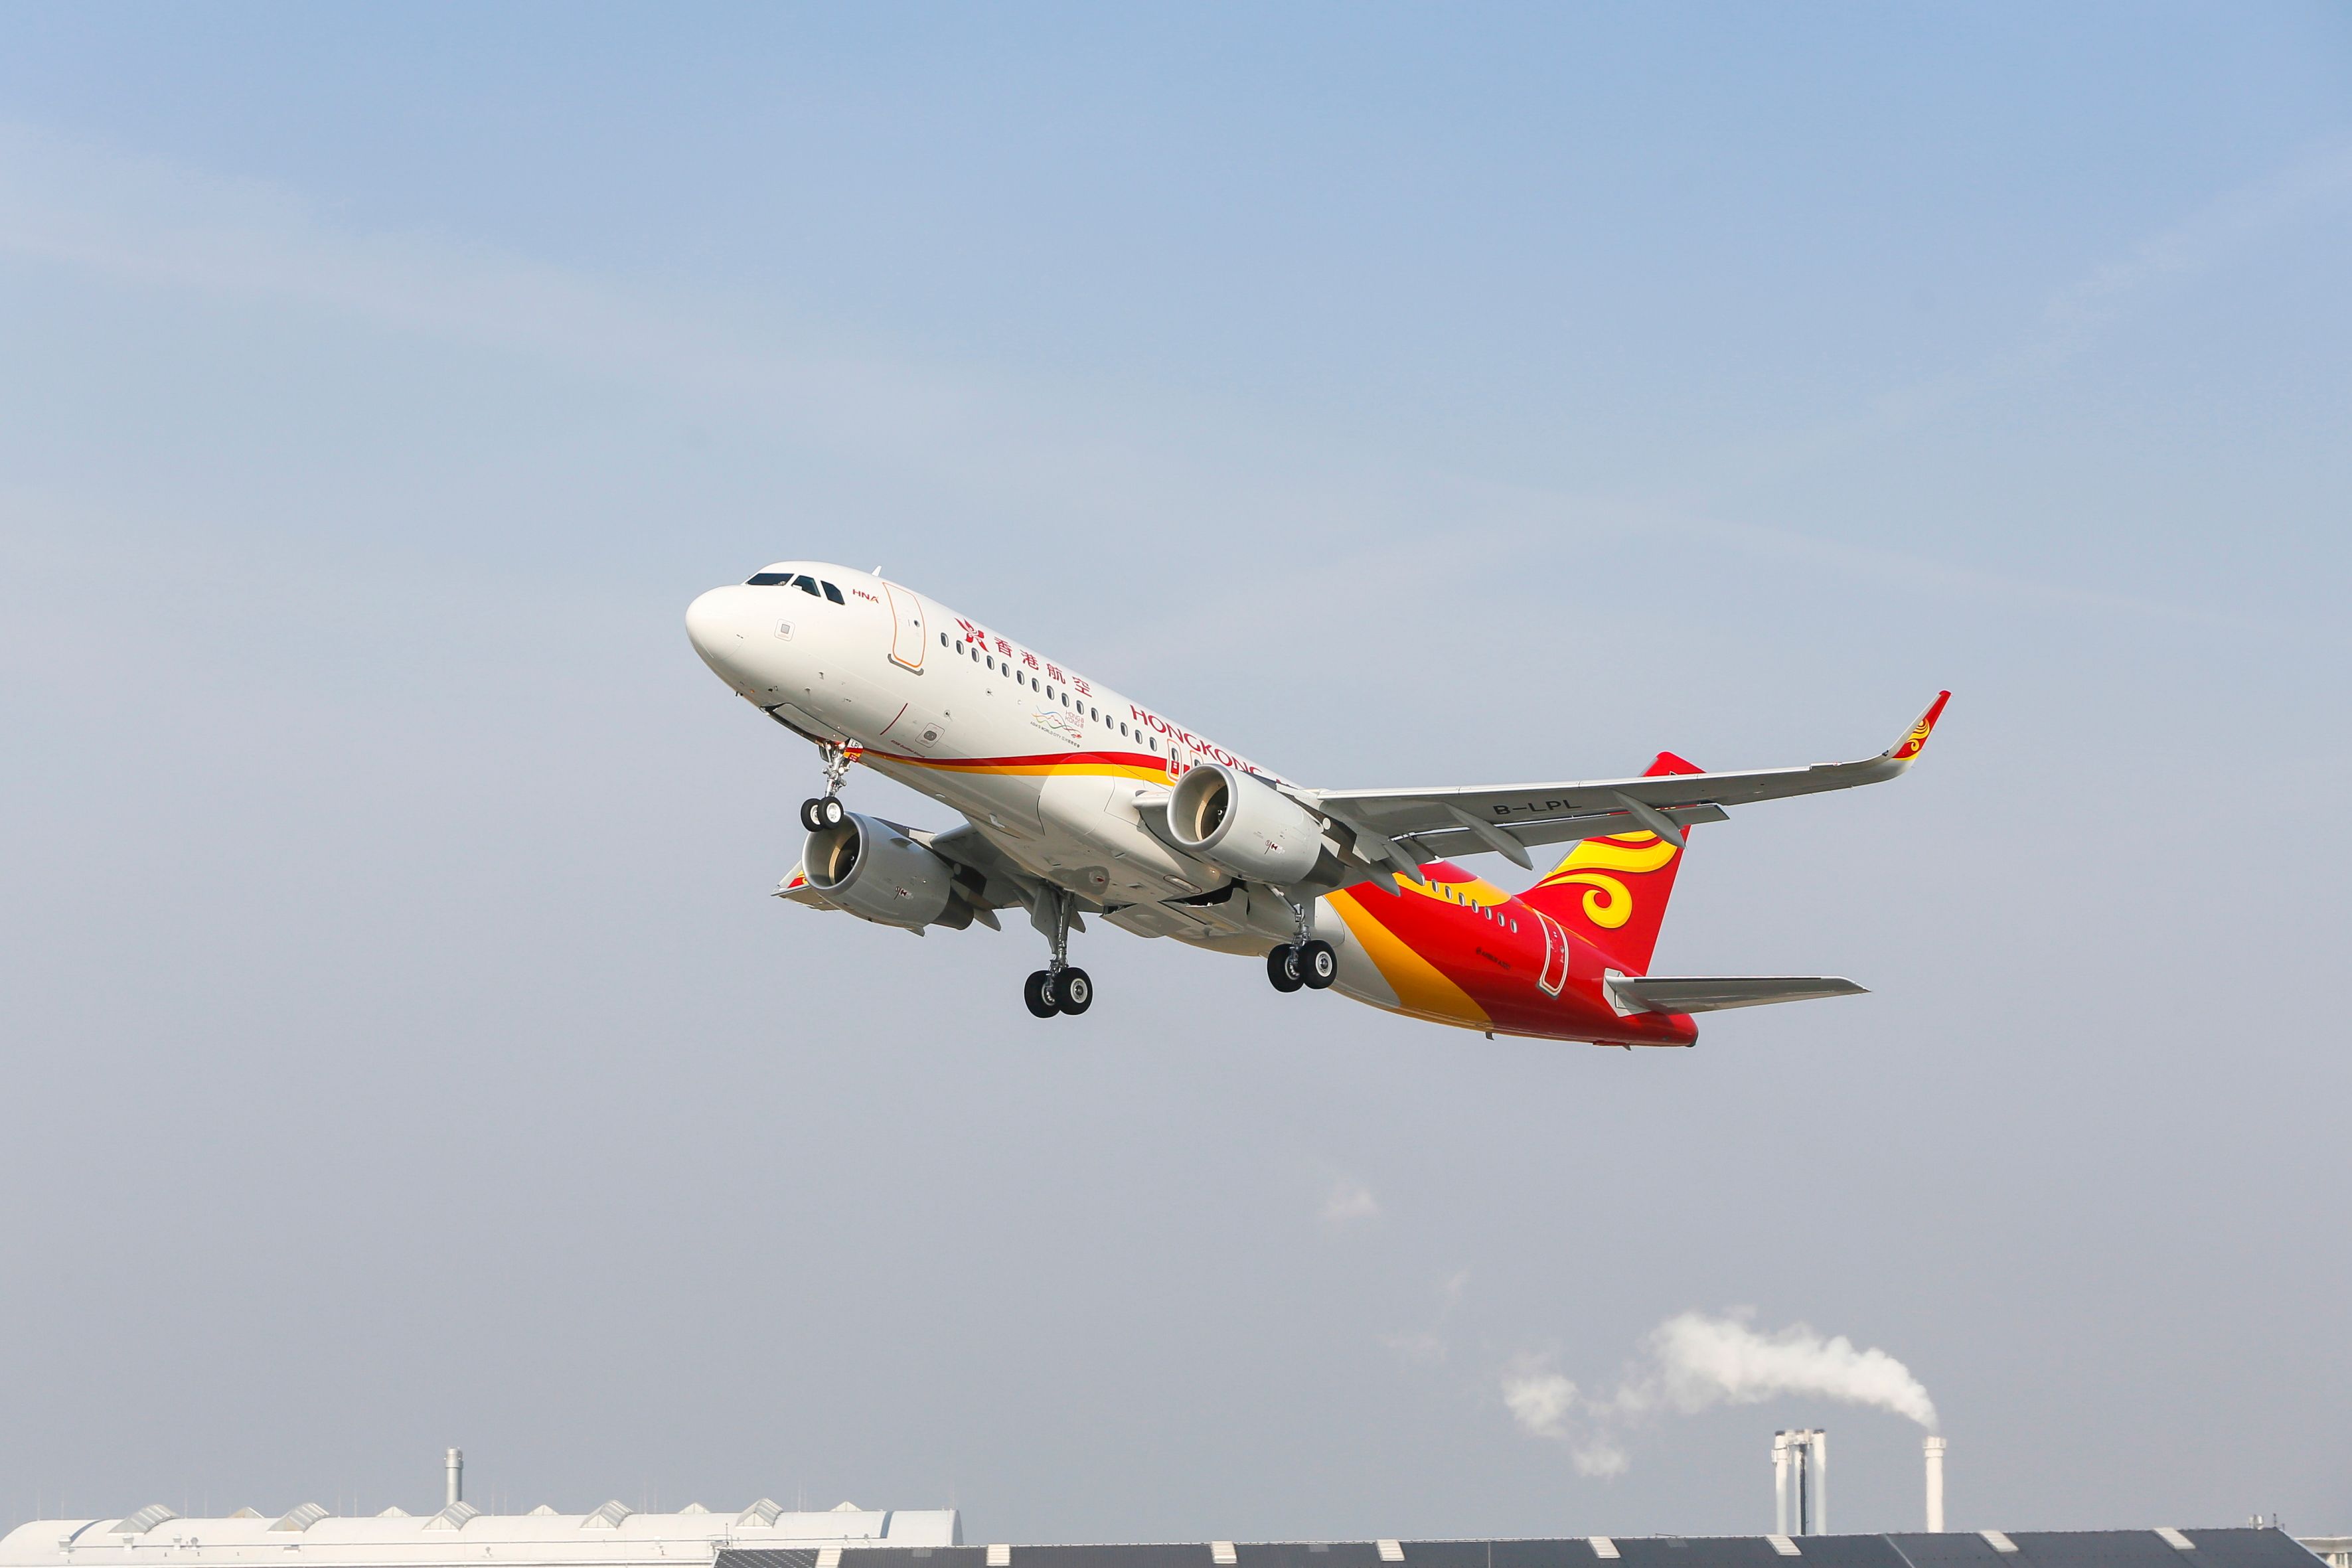 Hong Kong Airlines Airbus A320 taking off